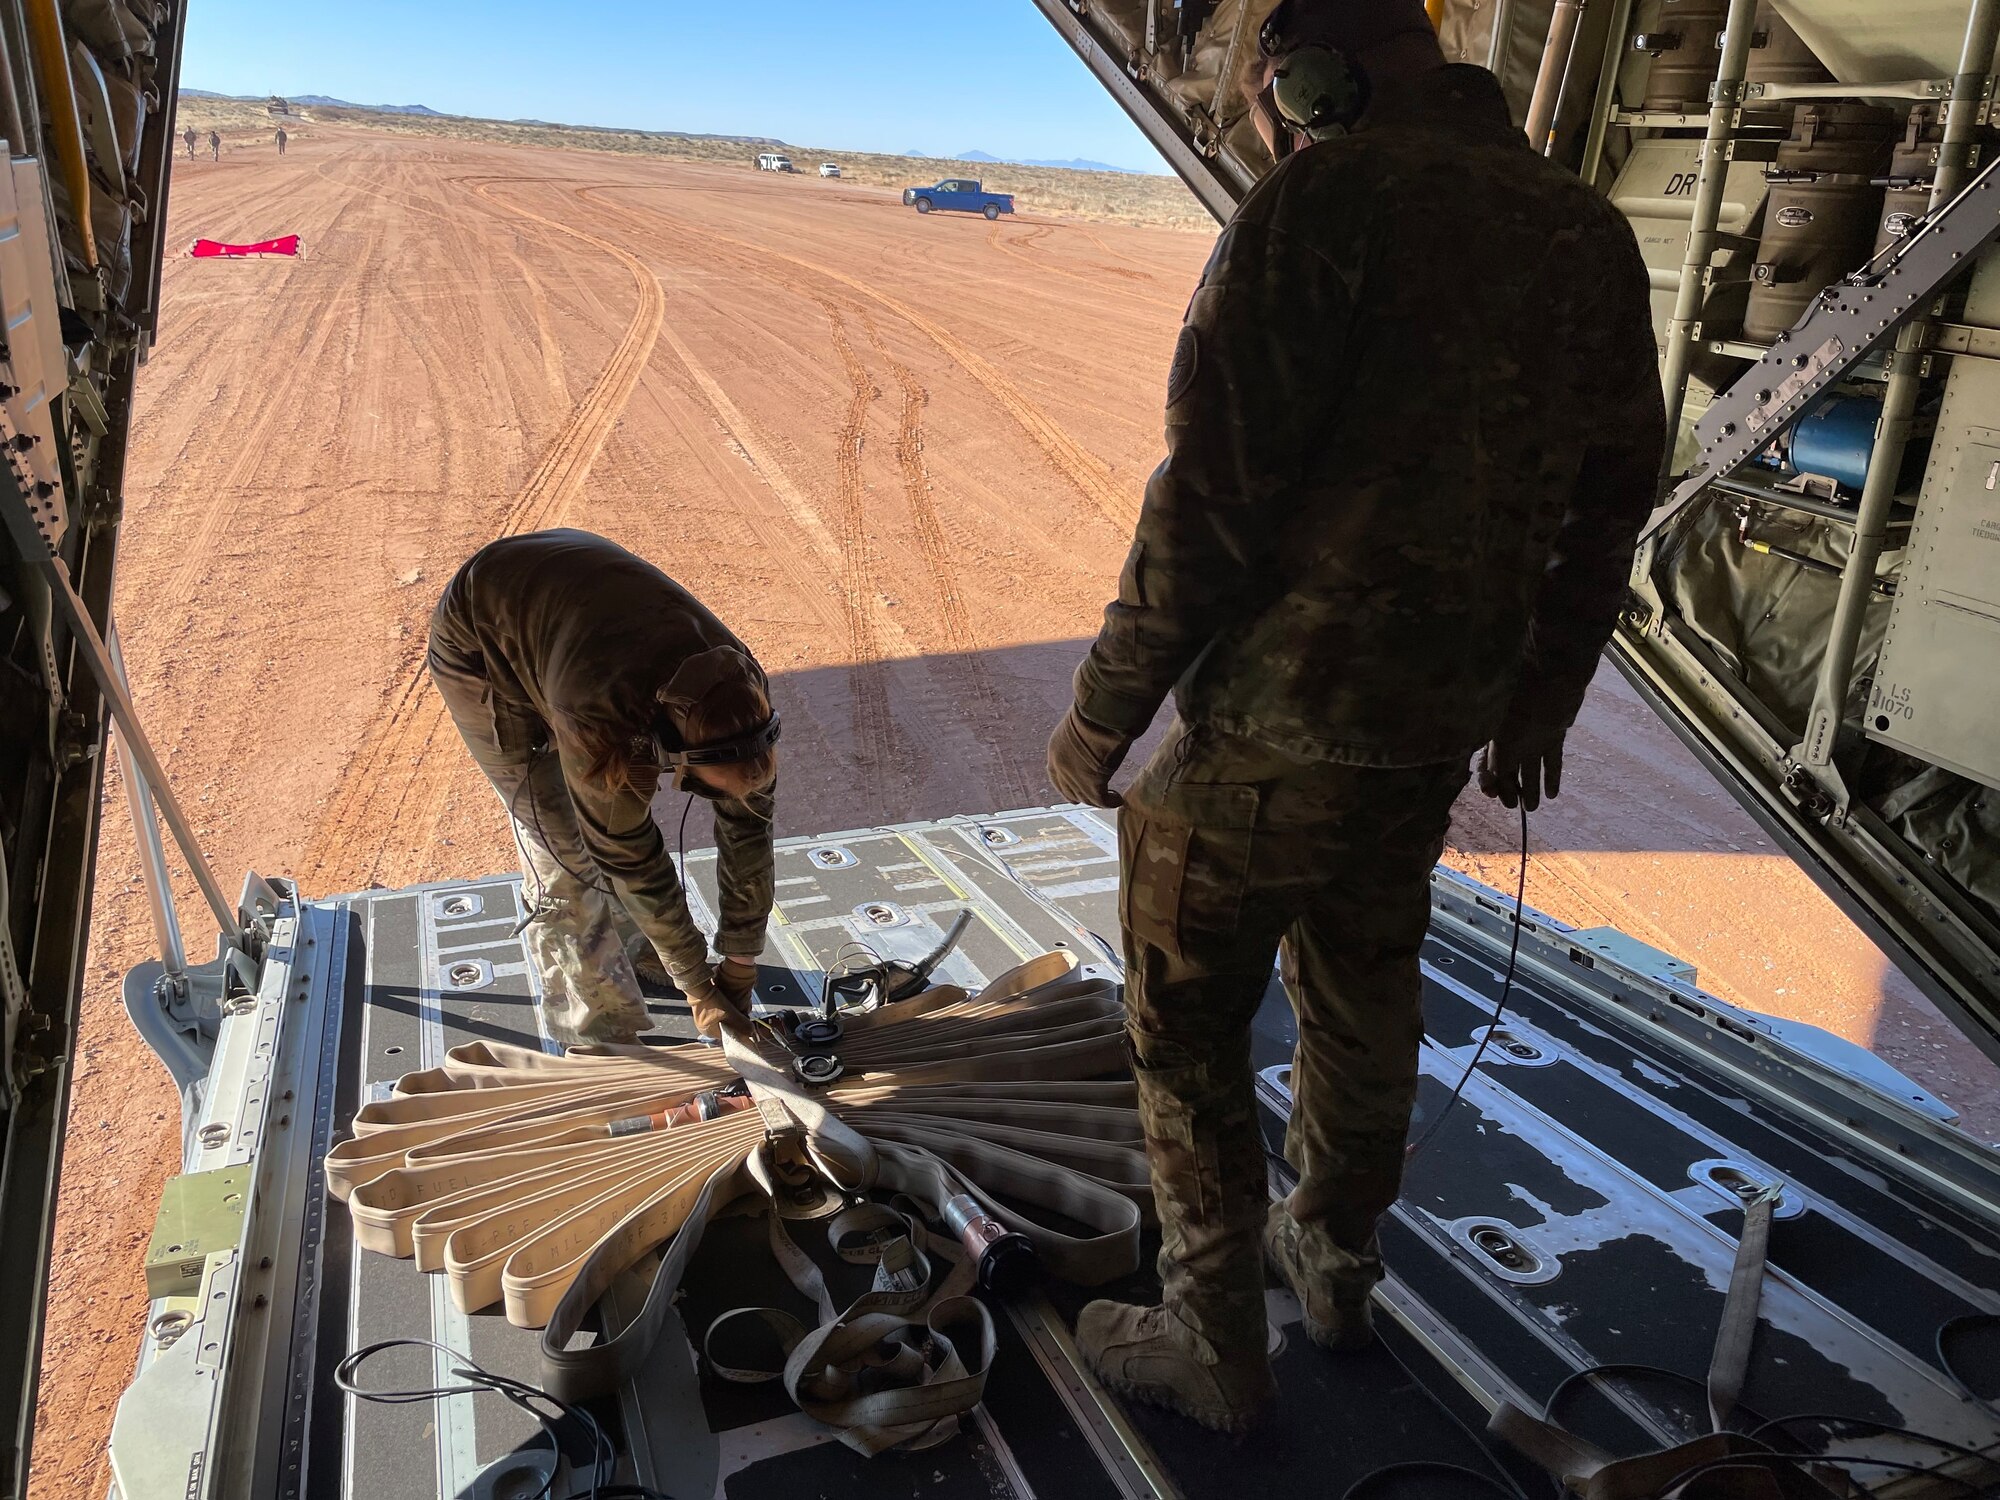 U.S. Air Force Airmen assigned to the 317th Airlift Wing unload a fuel hose from the cargo bay of a C-130J Super Hercules at Fort Bliss, Texas, Jan. 25, 2023. The 317th AW executed an Agile Combat Employment exercise by sending a C-130 to the Fort Bliss Range to perform Specialized Fueling Operations with the 3rd Brigade Combat Team, 1st AD and the 1st Battalion, 77th Armored Regiment. The units successfully passed fuel from a C-130 to an M1A2 Abrams Tank utilizing an Emergency Response Refueling Equipment Kit, marking the first time in Air Force history that a C-130 has been used to refuel an Abrams tank. (Courtesy photo)